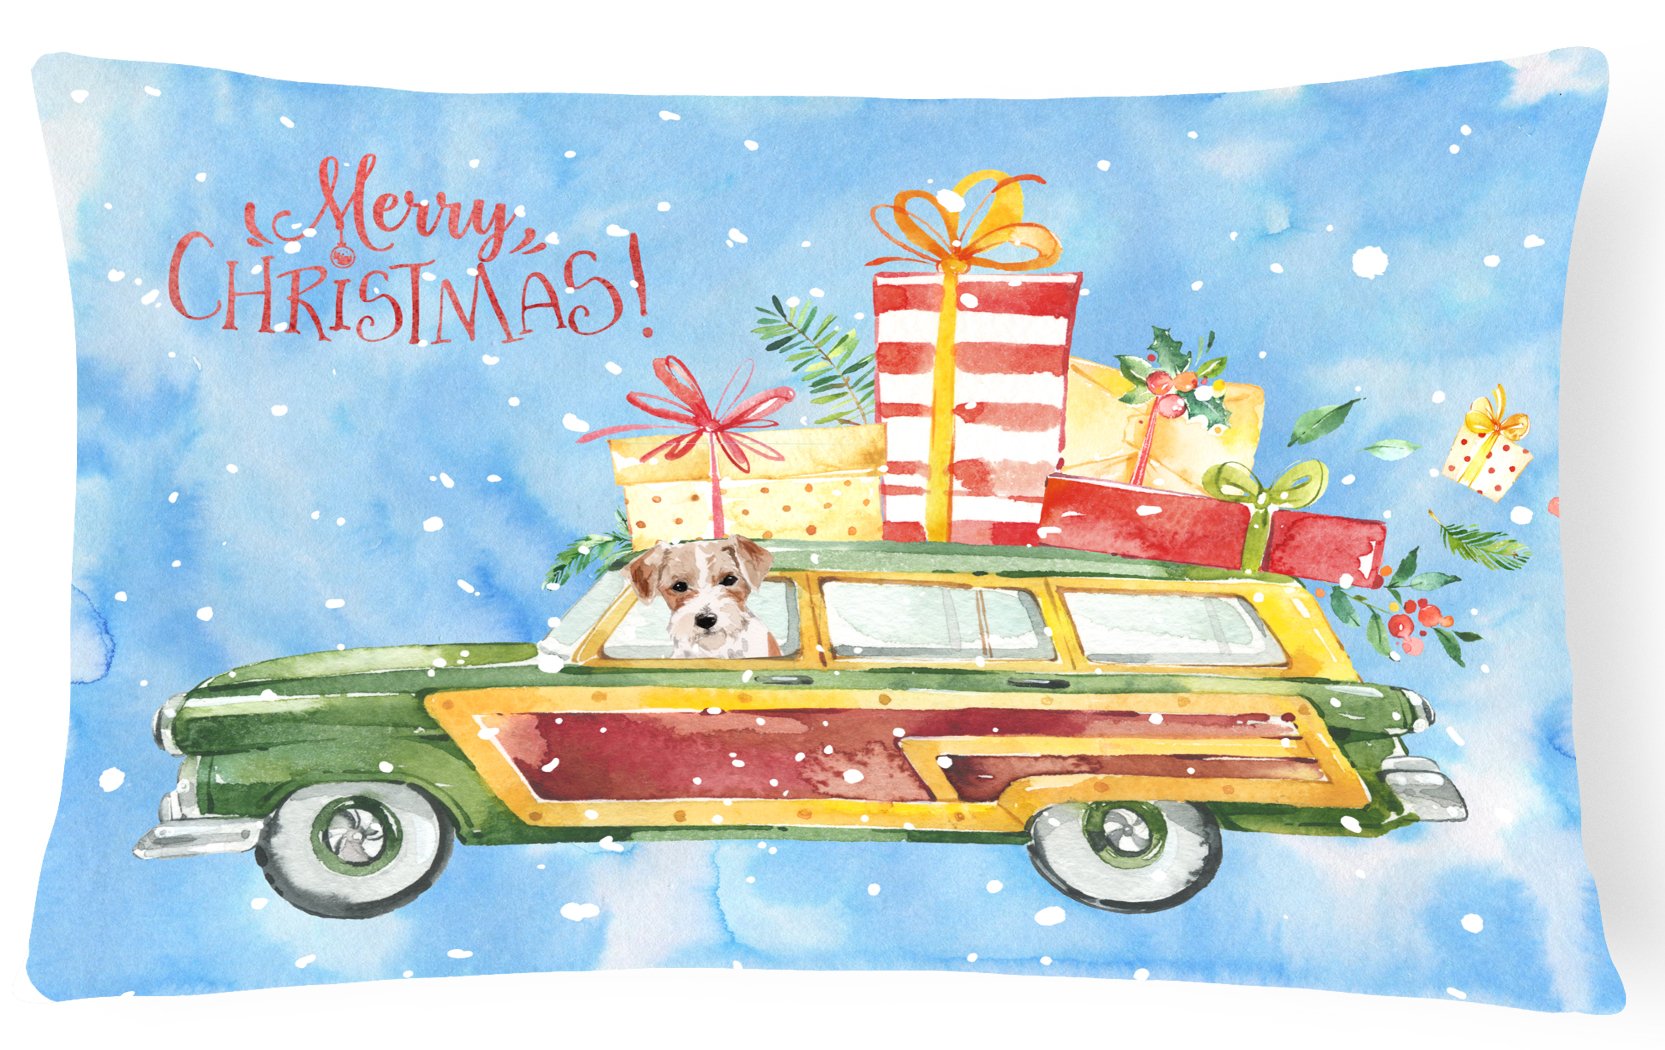 Merry Christmas Jack Russell Terrier Canvas Fabric Decorative Pillow CK2467PW1216 by Caroline's Treasures